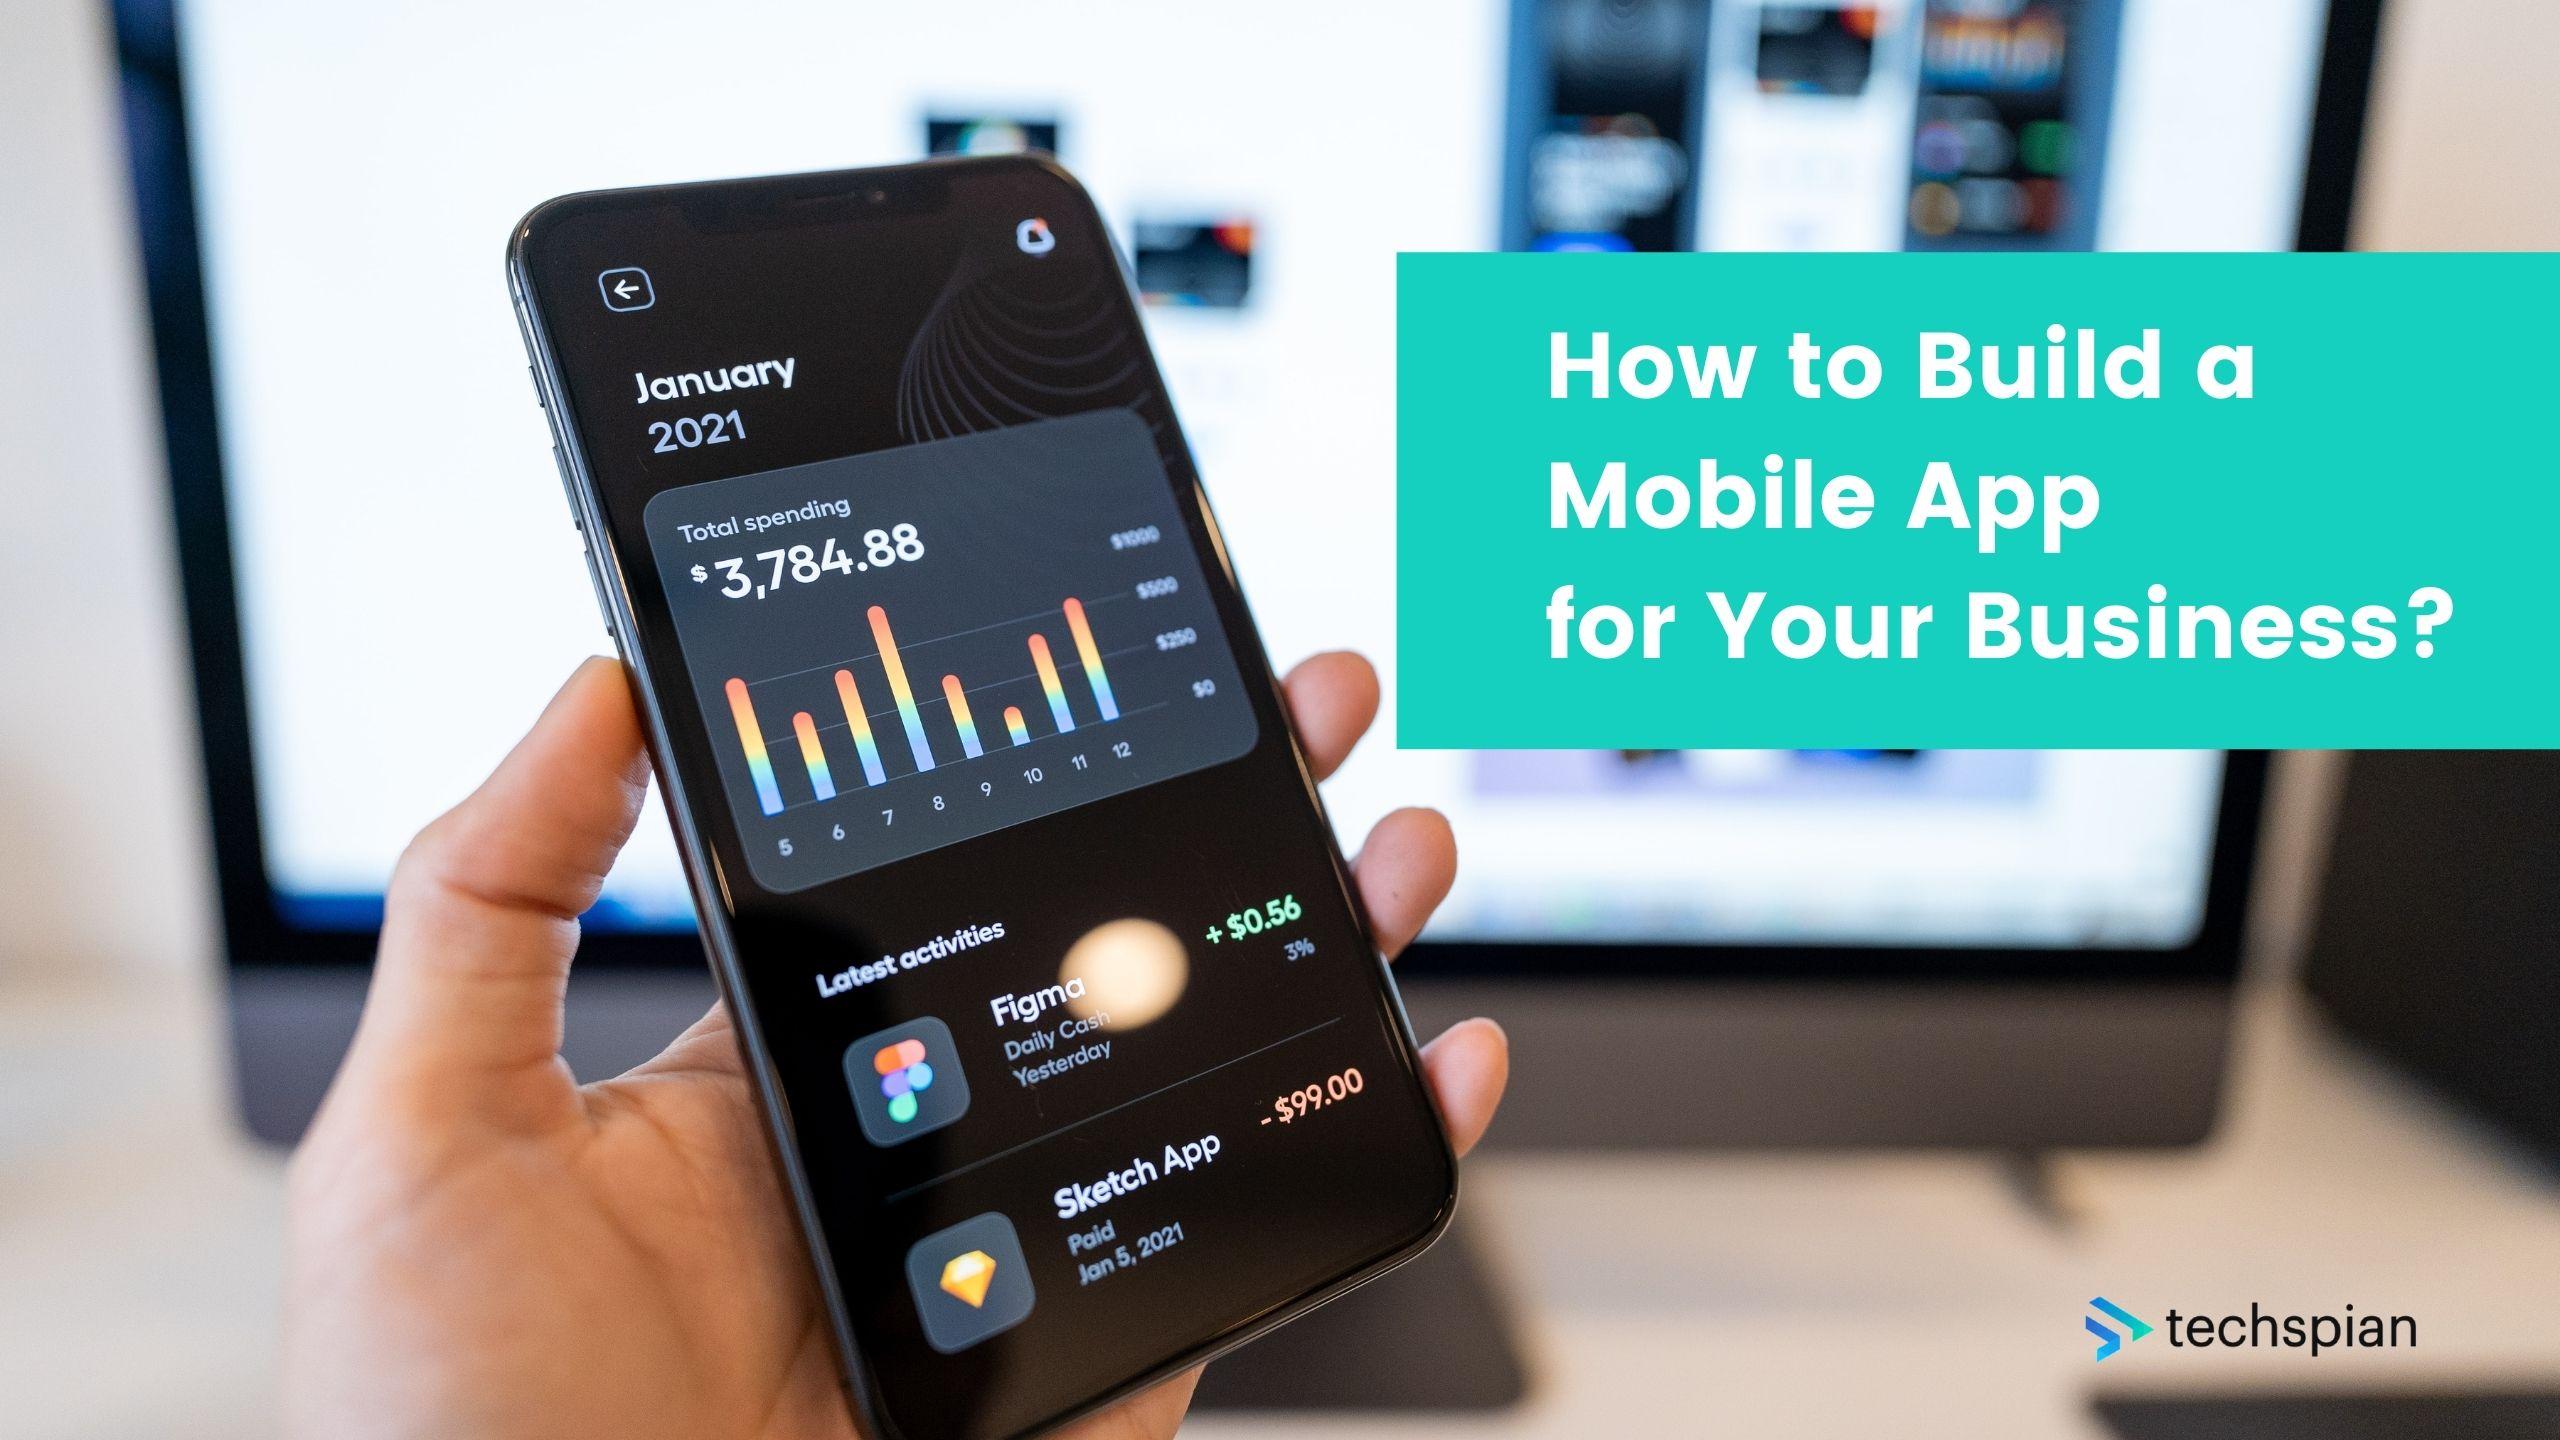 How to Build a Mobile App for Your Business?